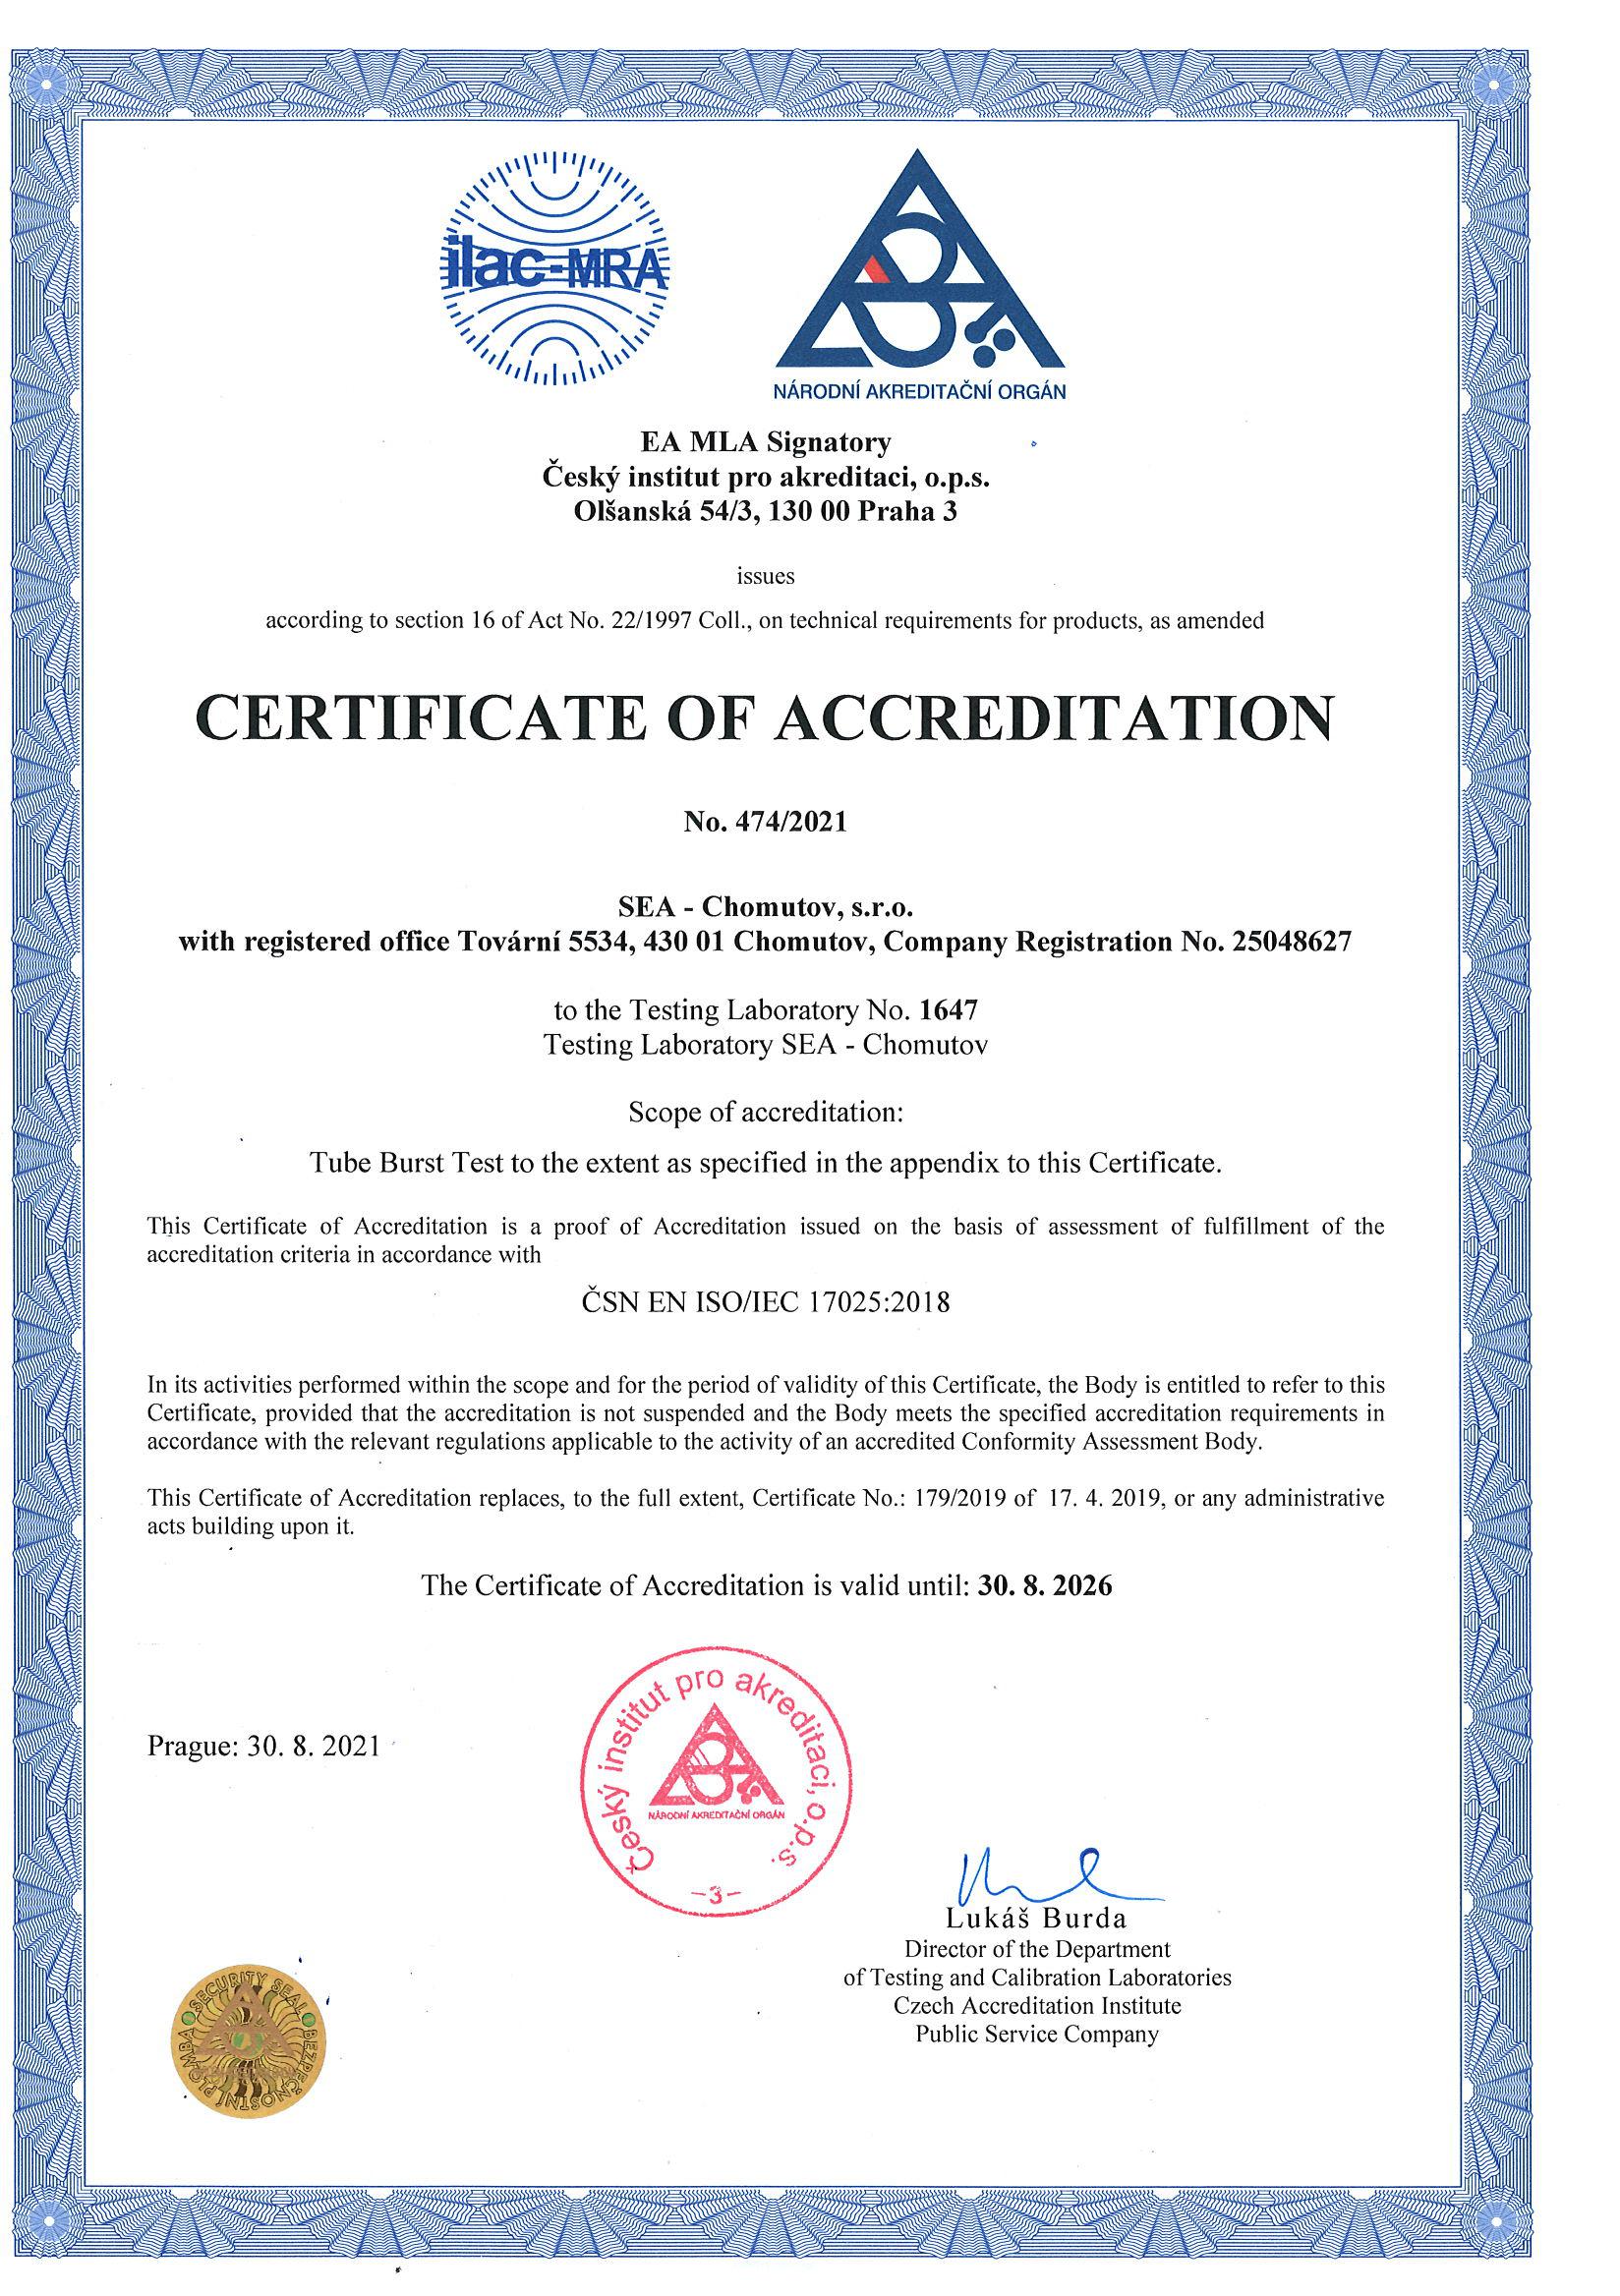 Certificate of accreditation of testing laboratory according to ČSN EN ISO / IEC 17025:2005